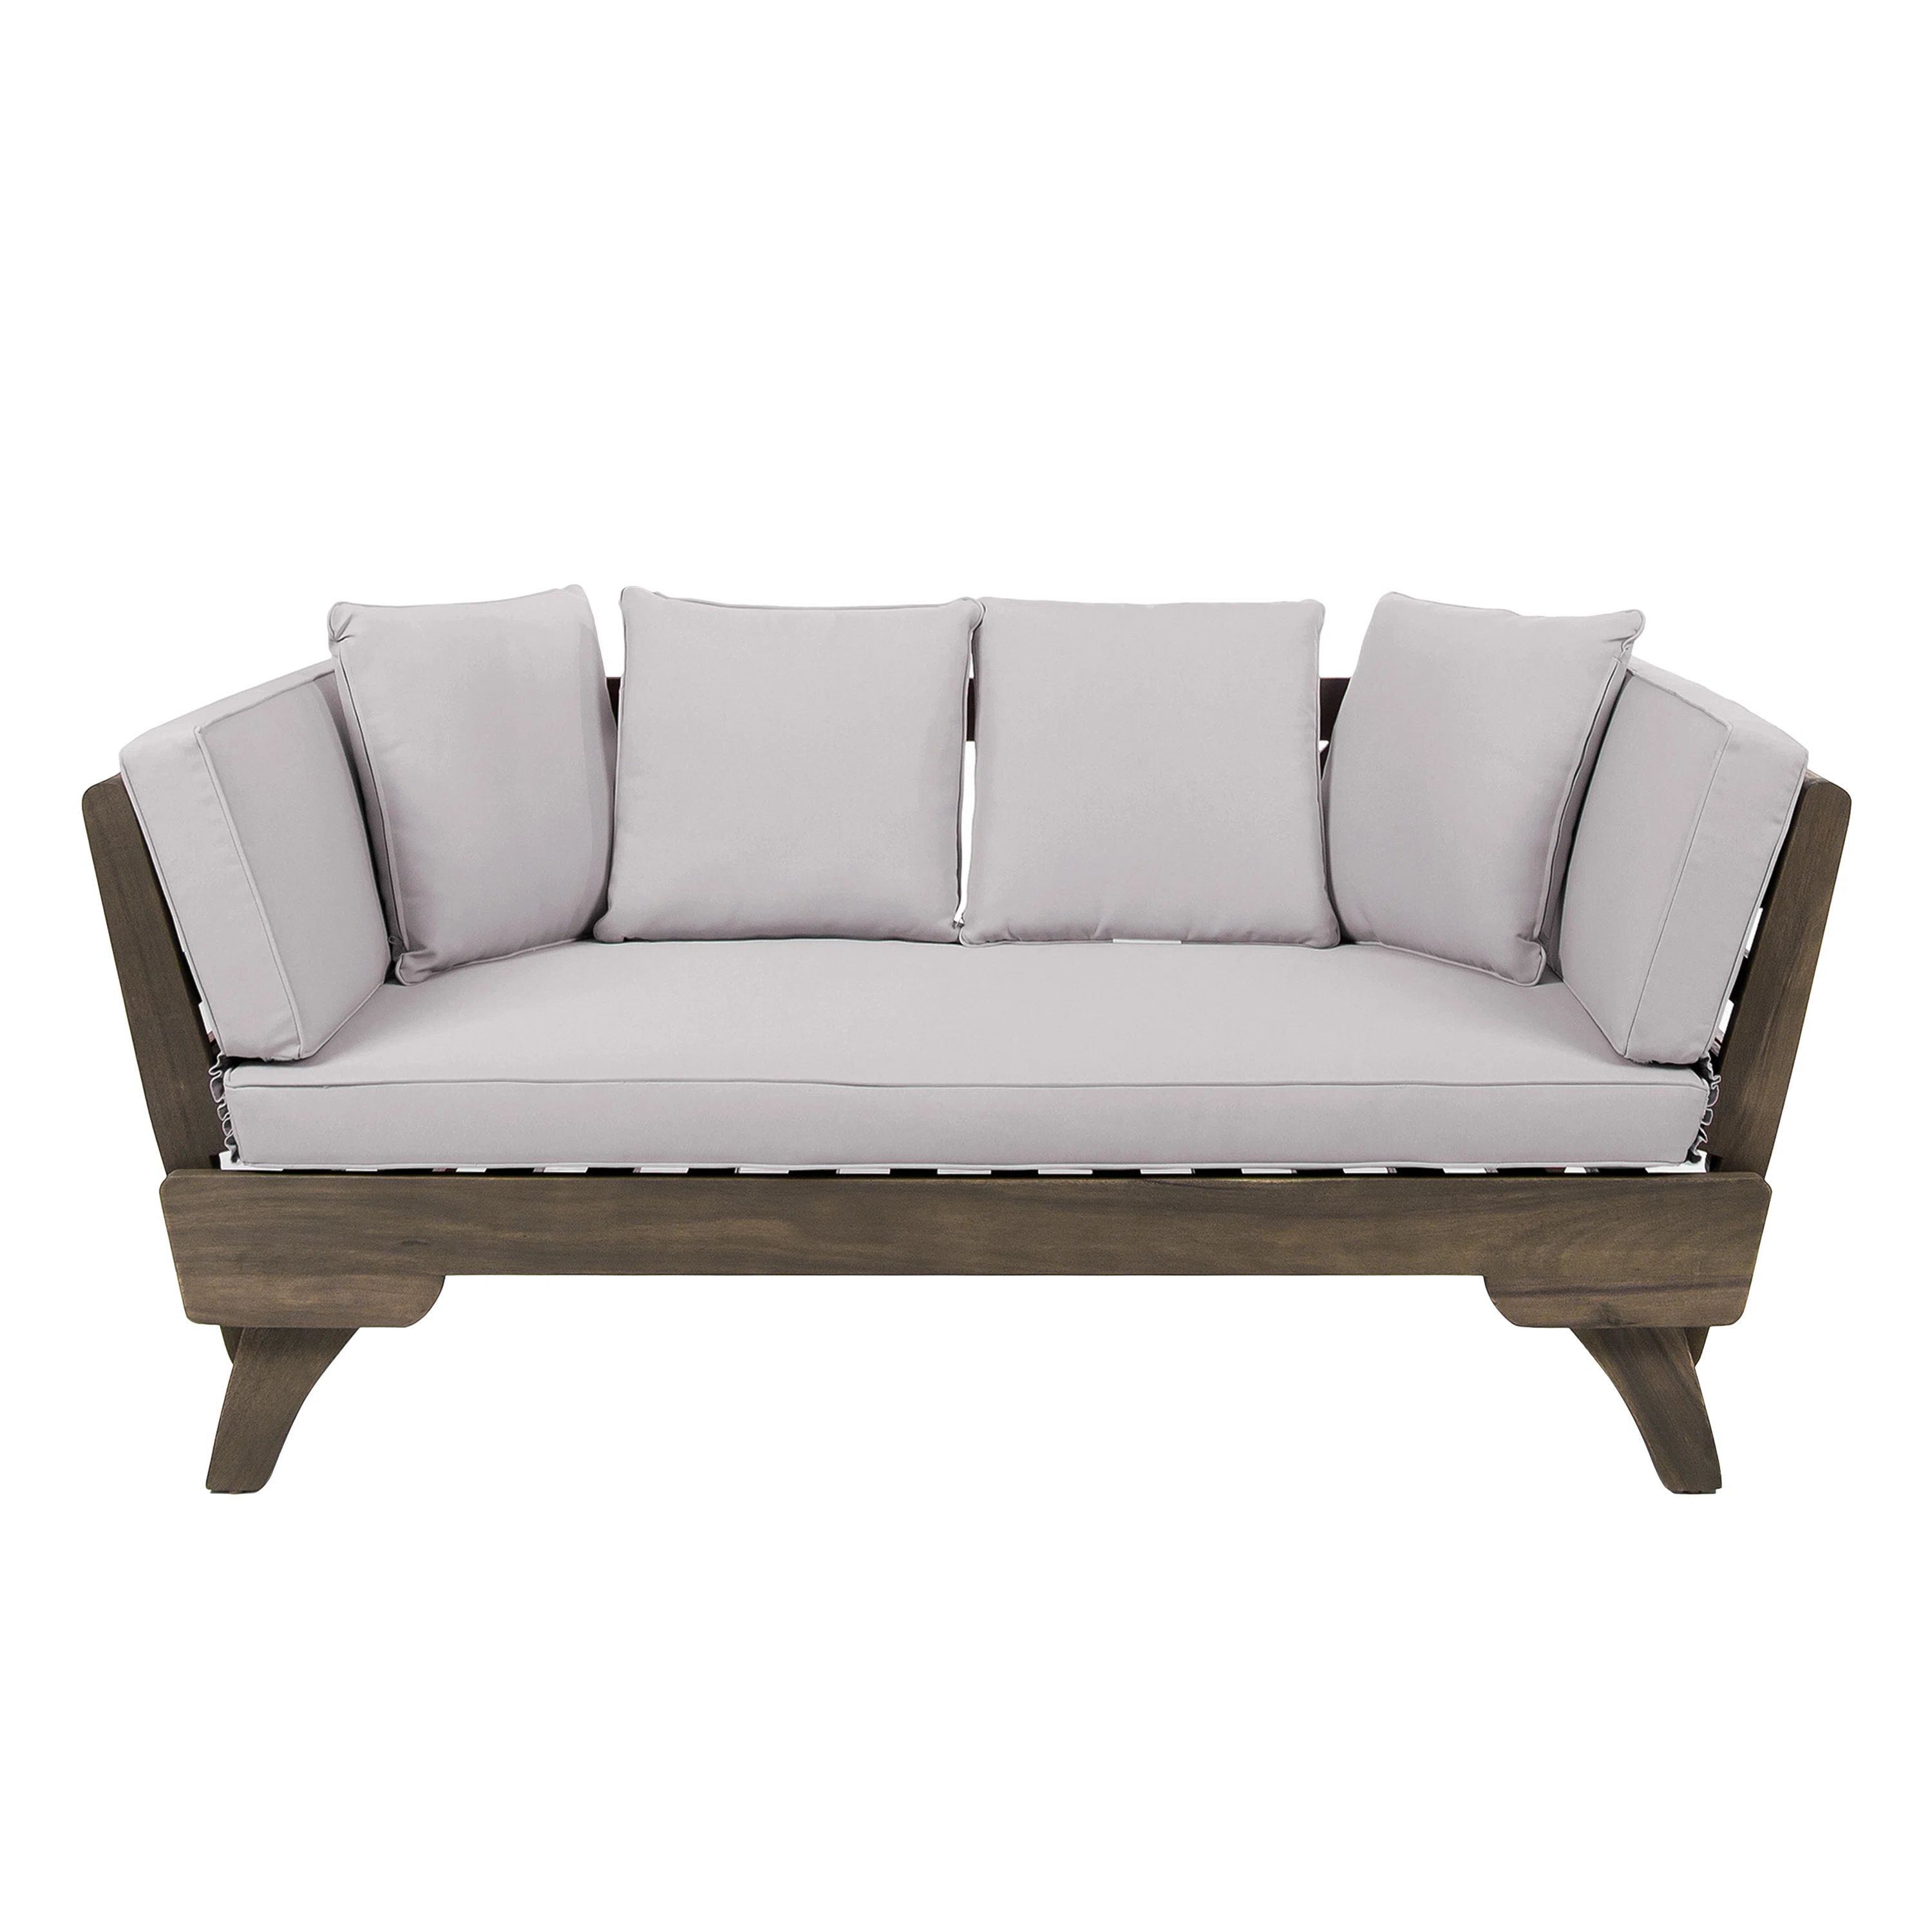 Roni 65.5'' Wide Outdoor Patio Daybed with Cushions | Wayfair North America